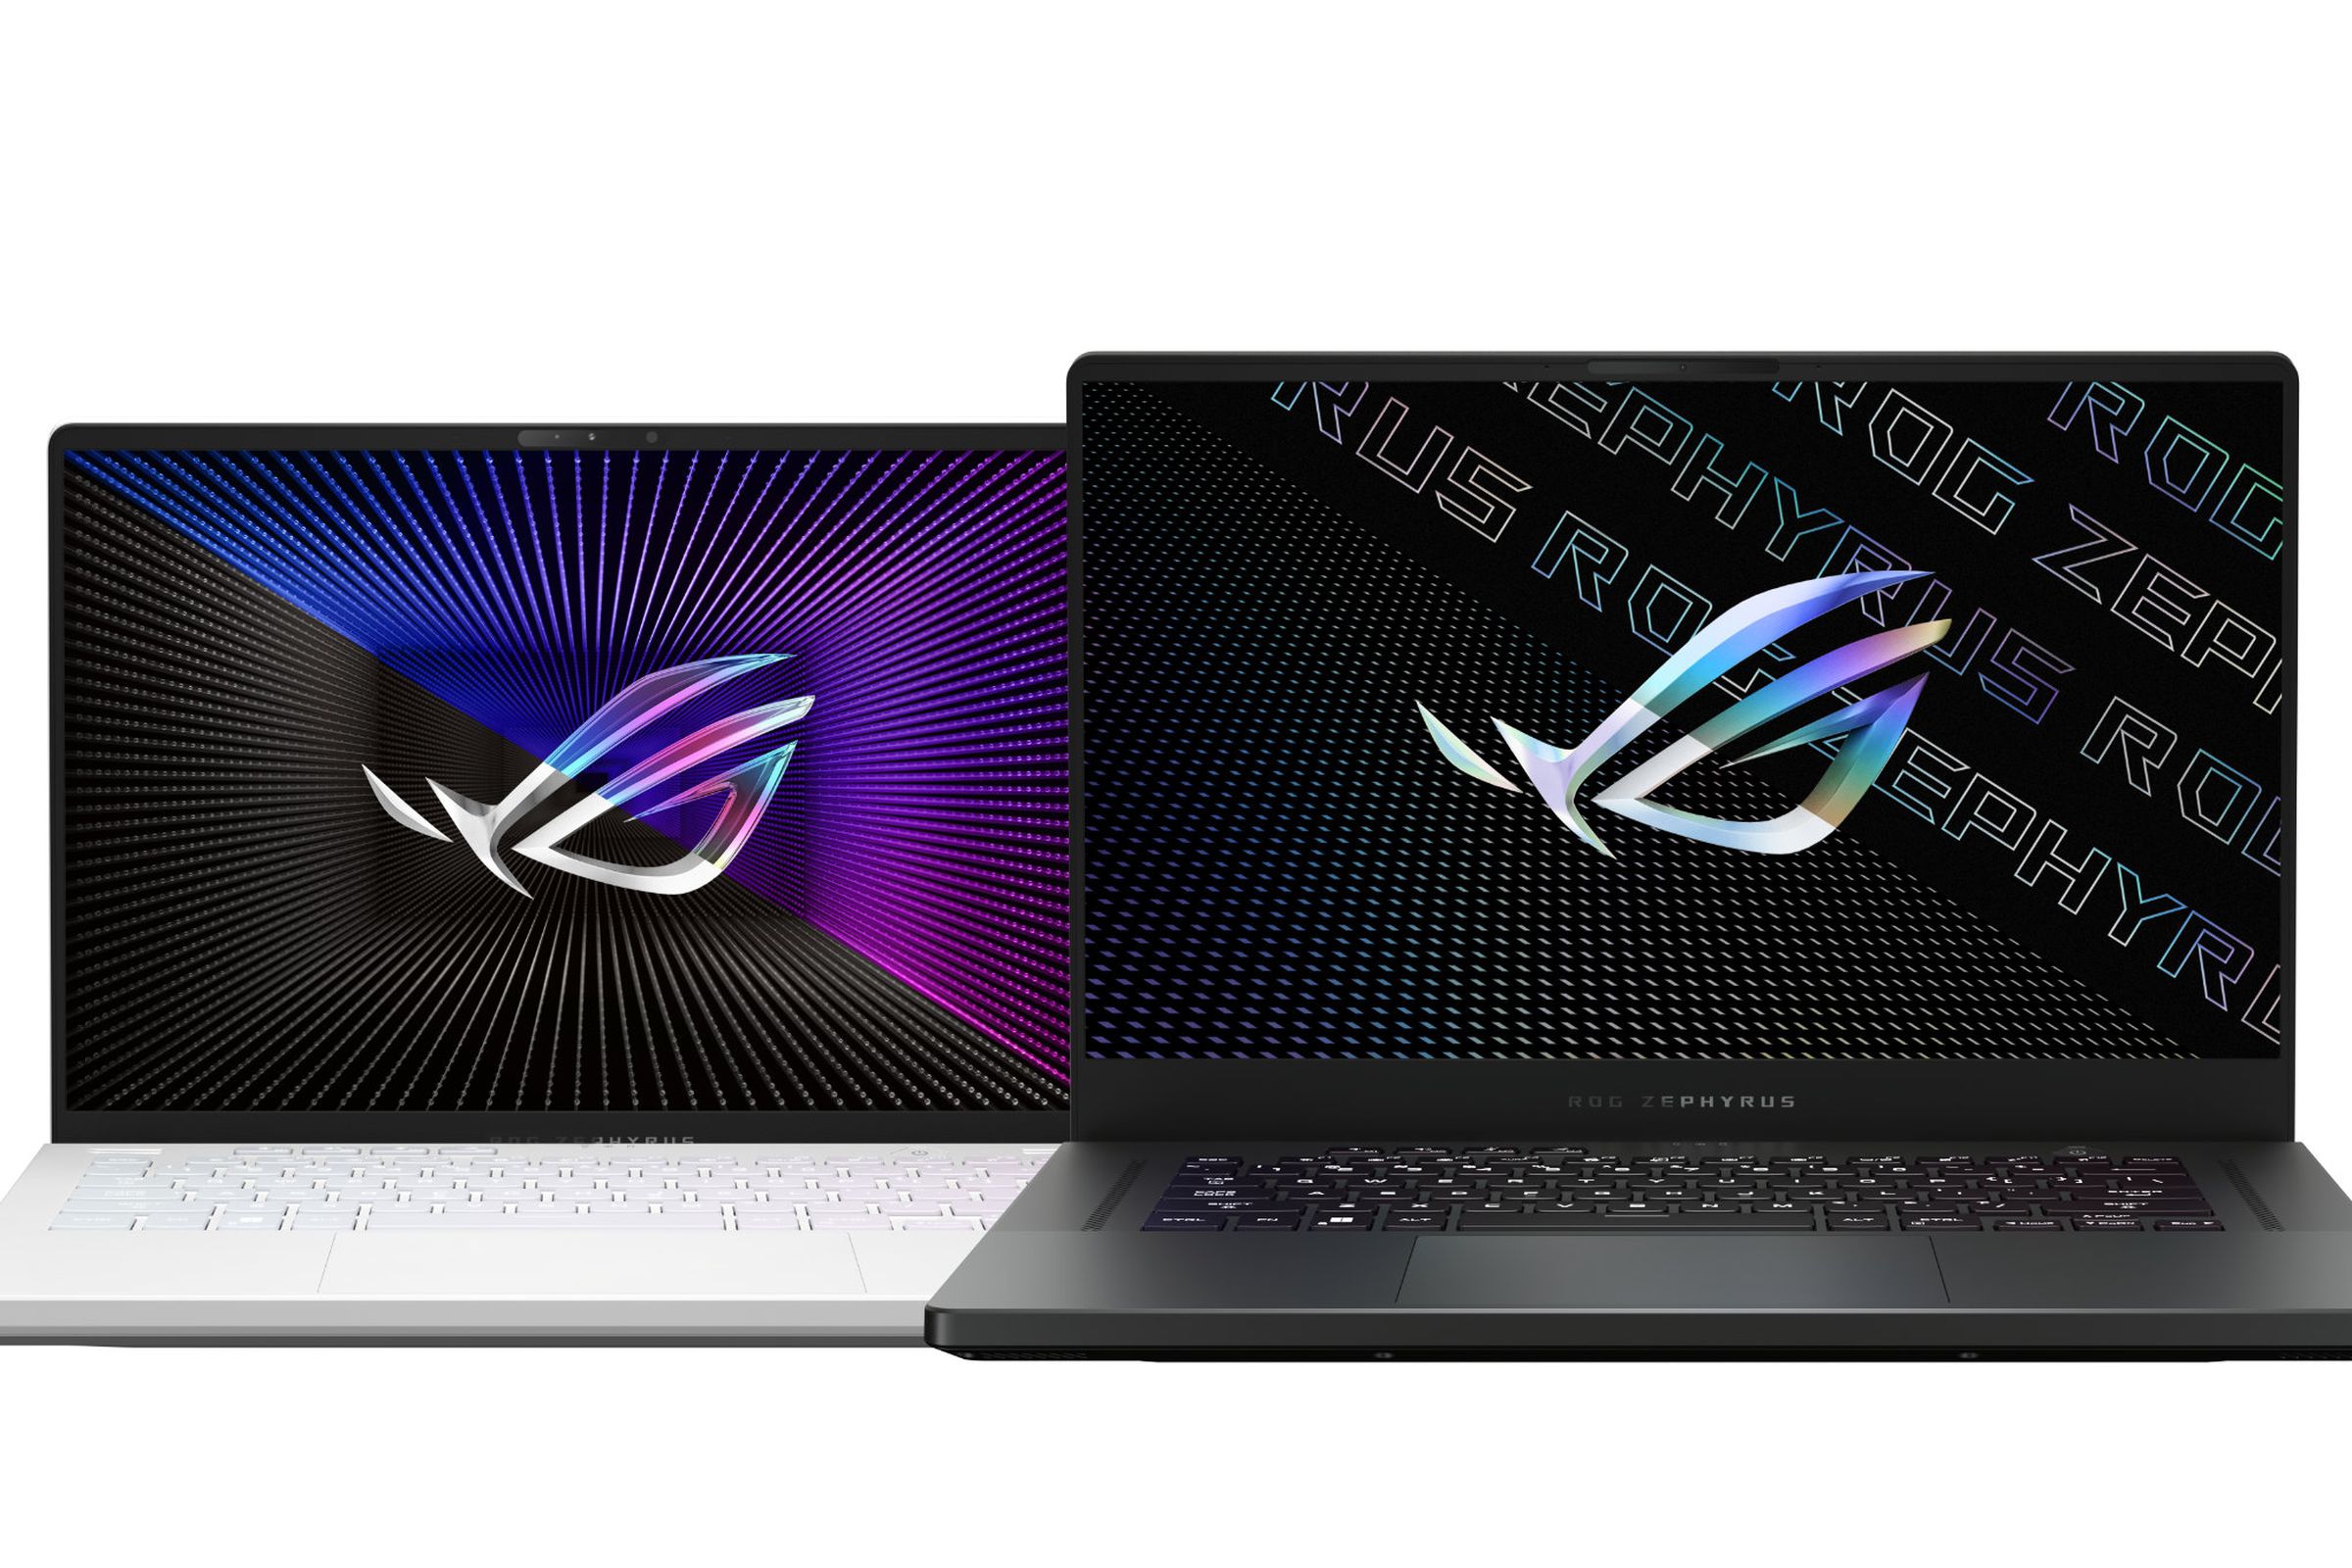 Asus ROG Zephyrus G14 and G15